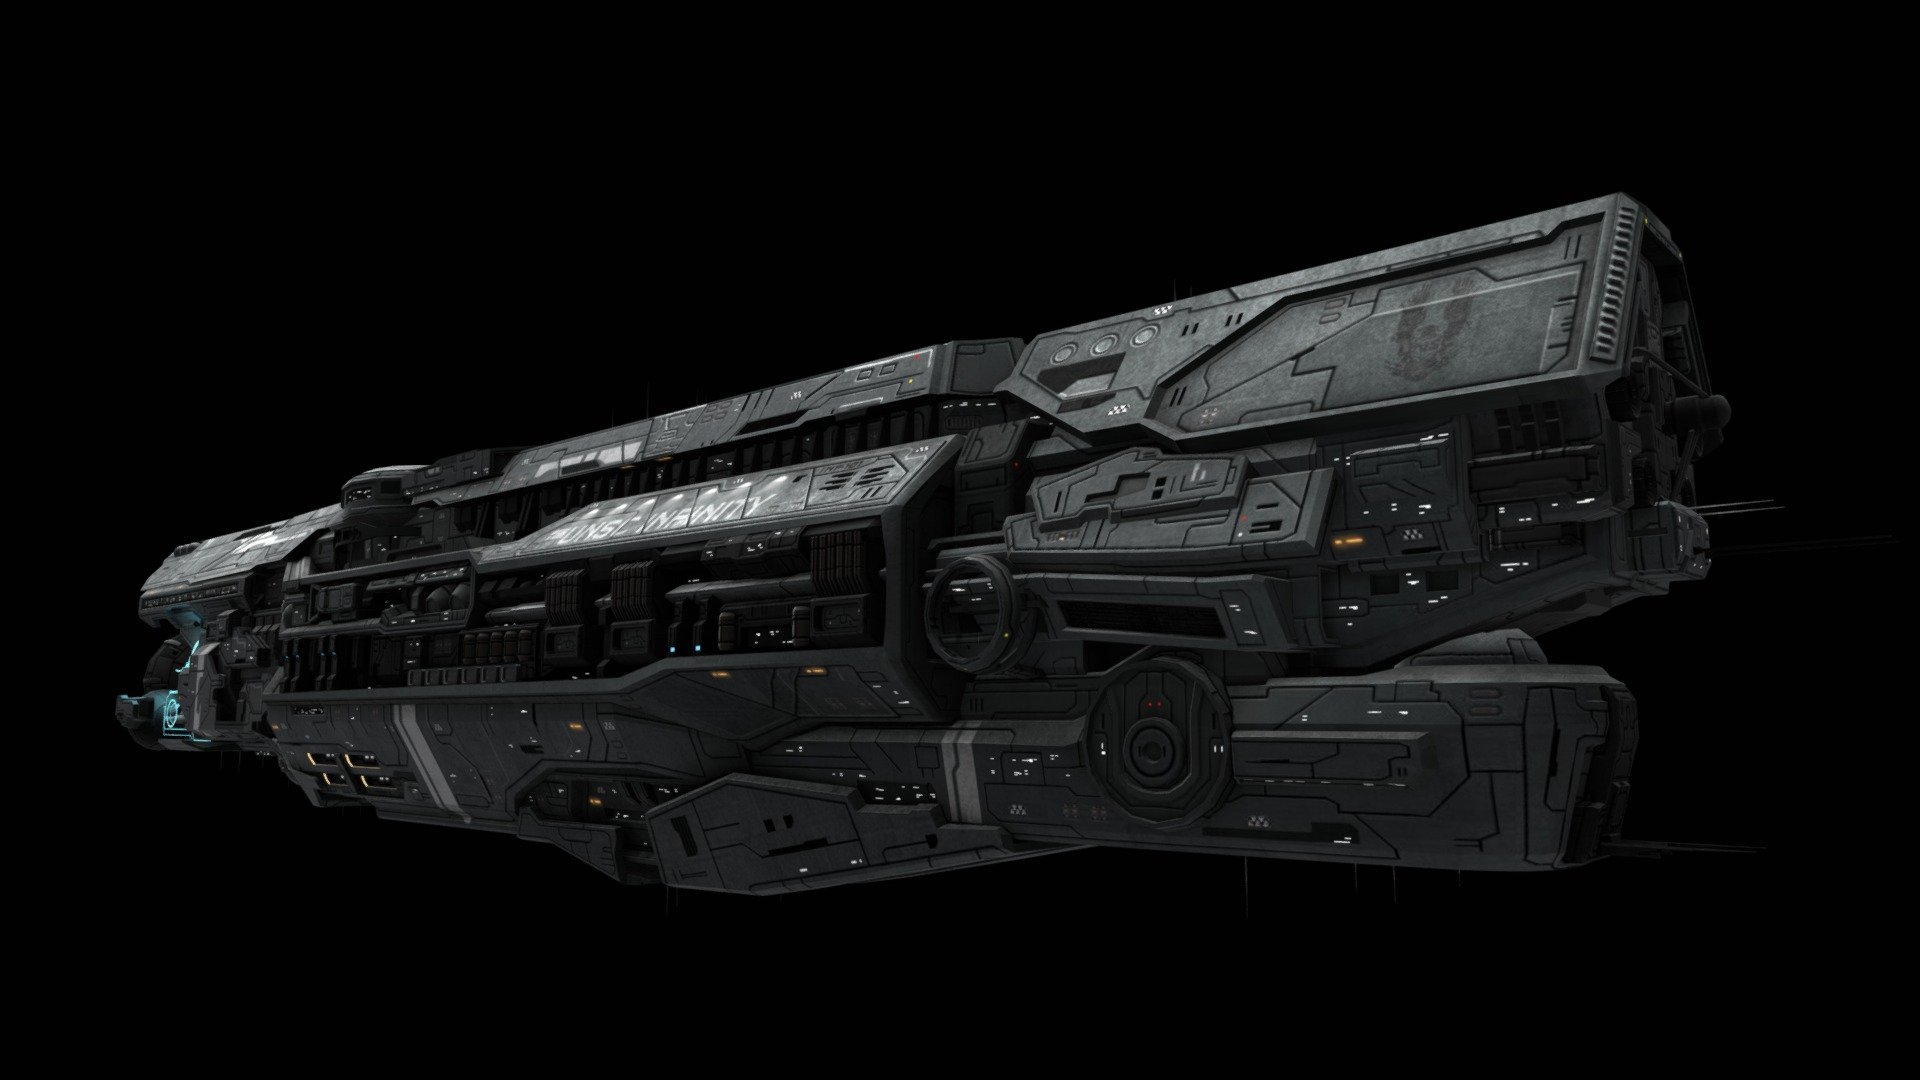 Model of the UNSC Infinity from the Halo universe, made for Sins of the Prophets, a Halo themed space combat mod for Sins of a Solar Empire. This model's design is based heavily on the Halo 5 appearance of the Infinity mixed with some elements of its Halo 4 style 3d model